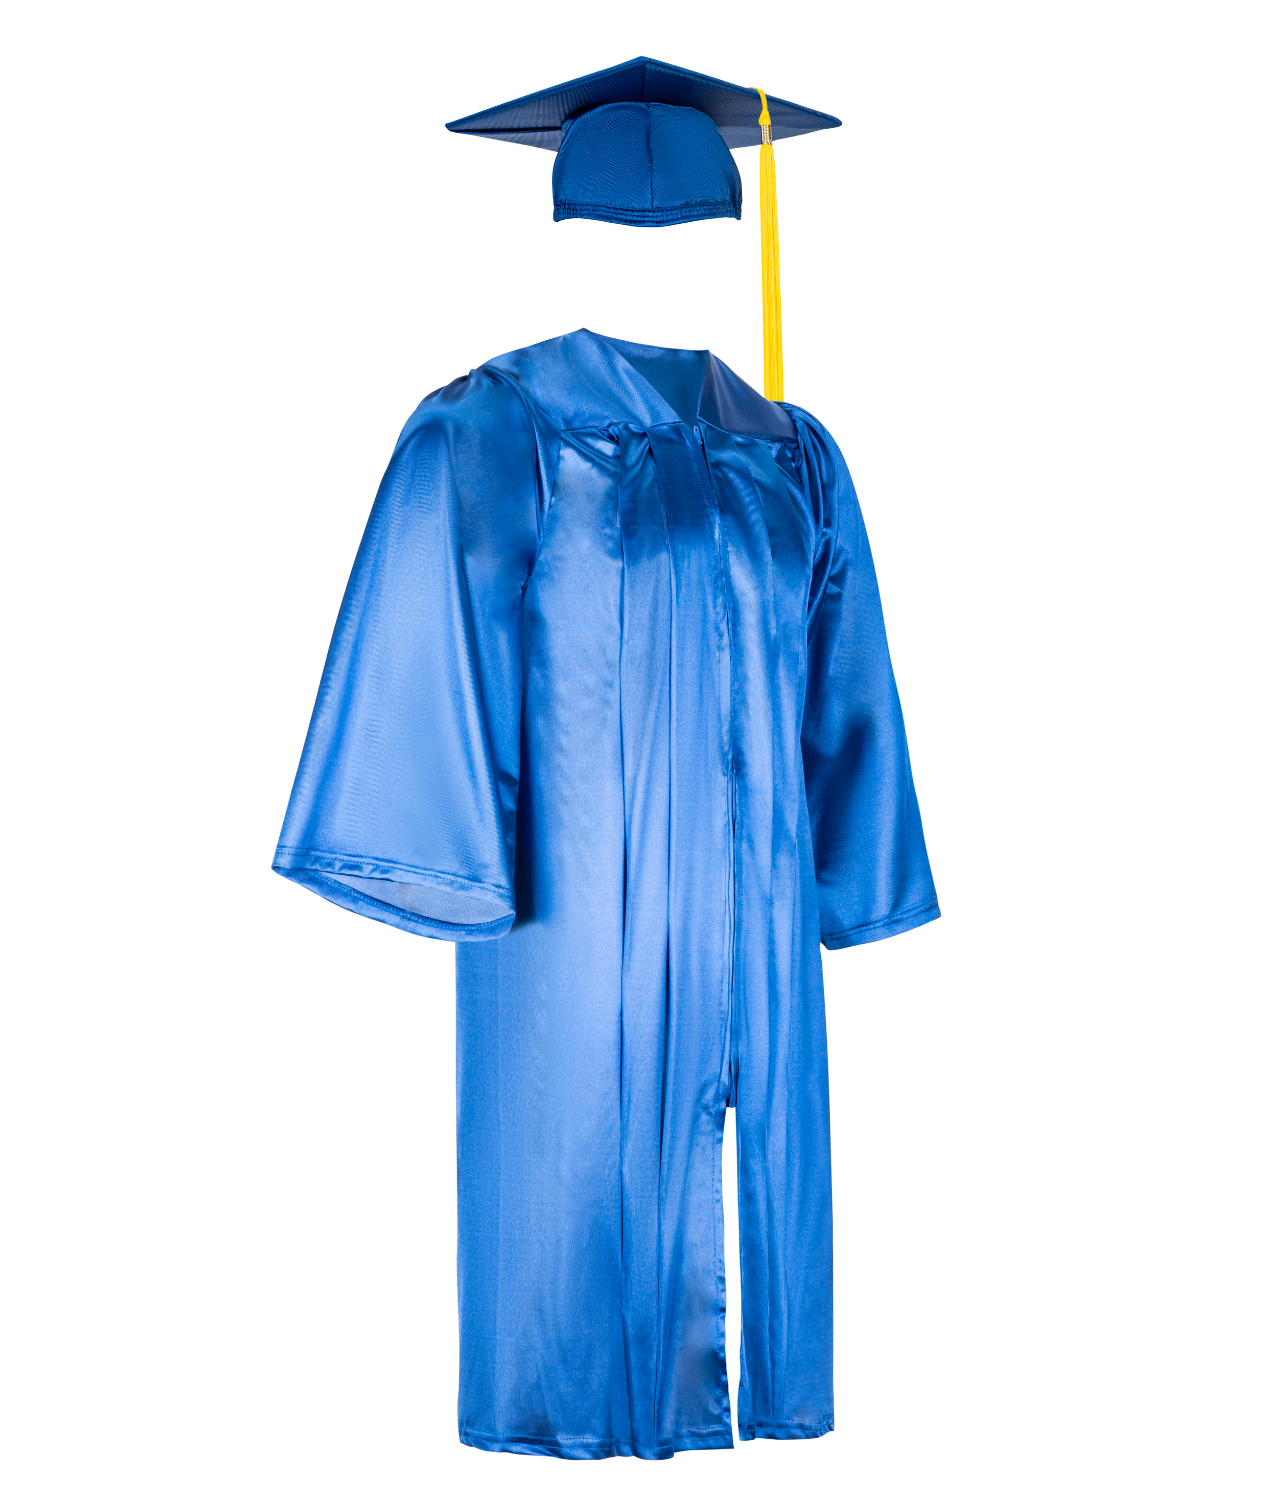 School Uniform Cap And Gown 2023 Matte Graduation Cap And Gown Robe Caps  With Tassel For High School Senior College Ceremony - School Uniforms -  AliExpress